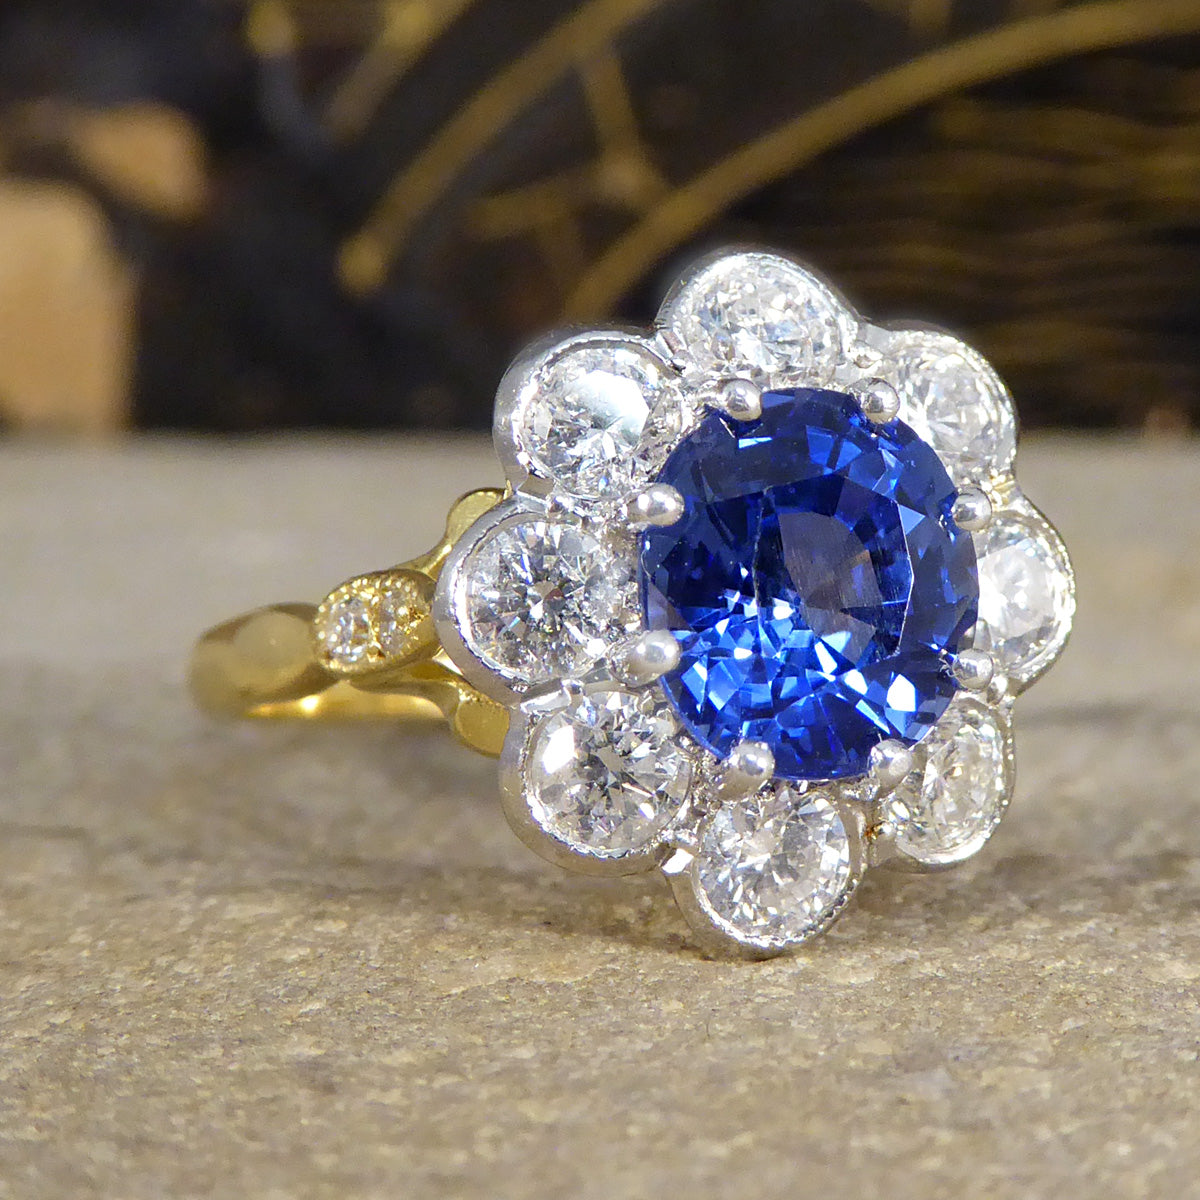 Edwardian Inspired 2.24ct Sapphire and Diamond Cluster Ring in 18ct Gold